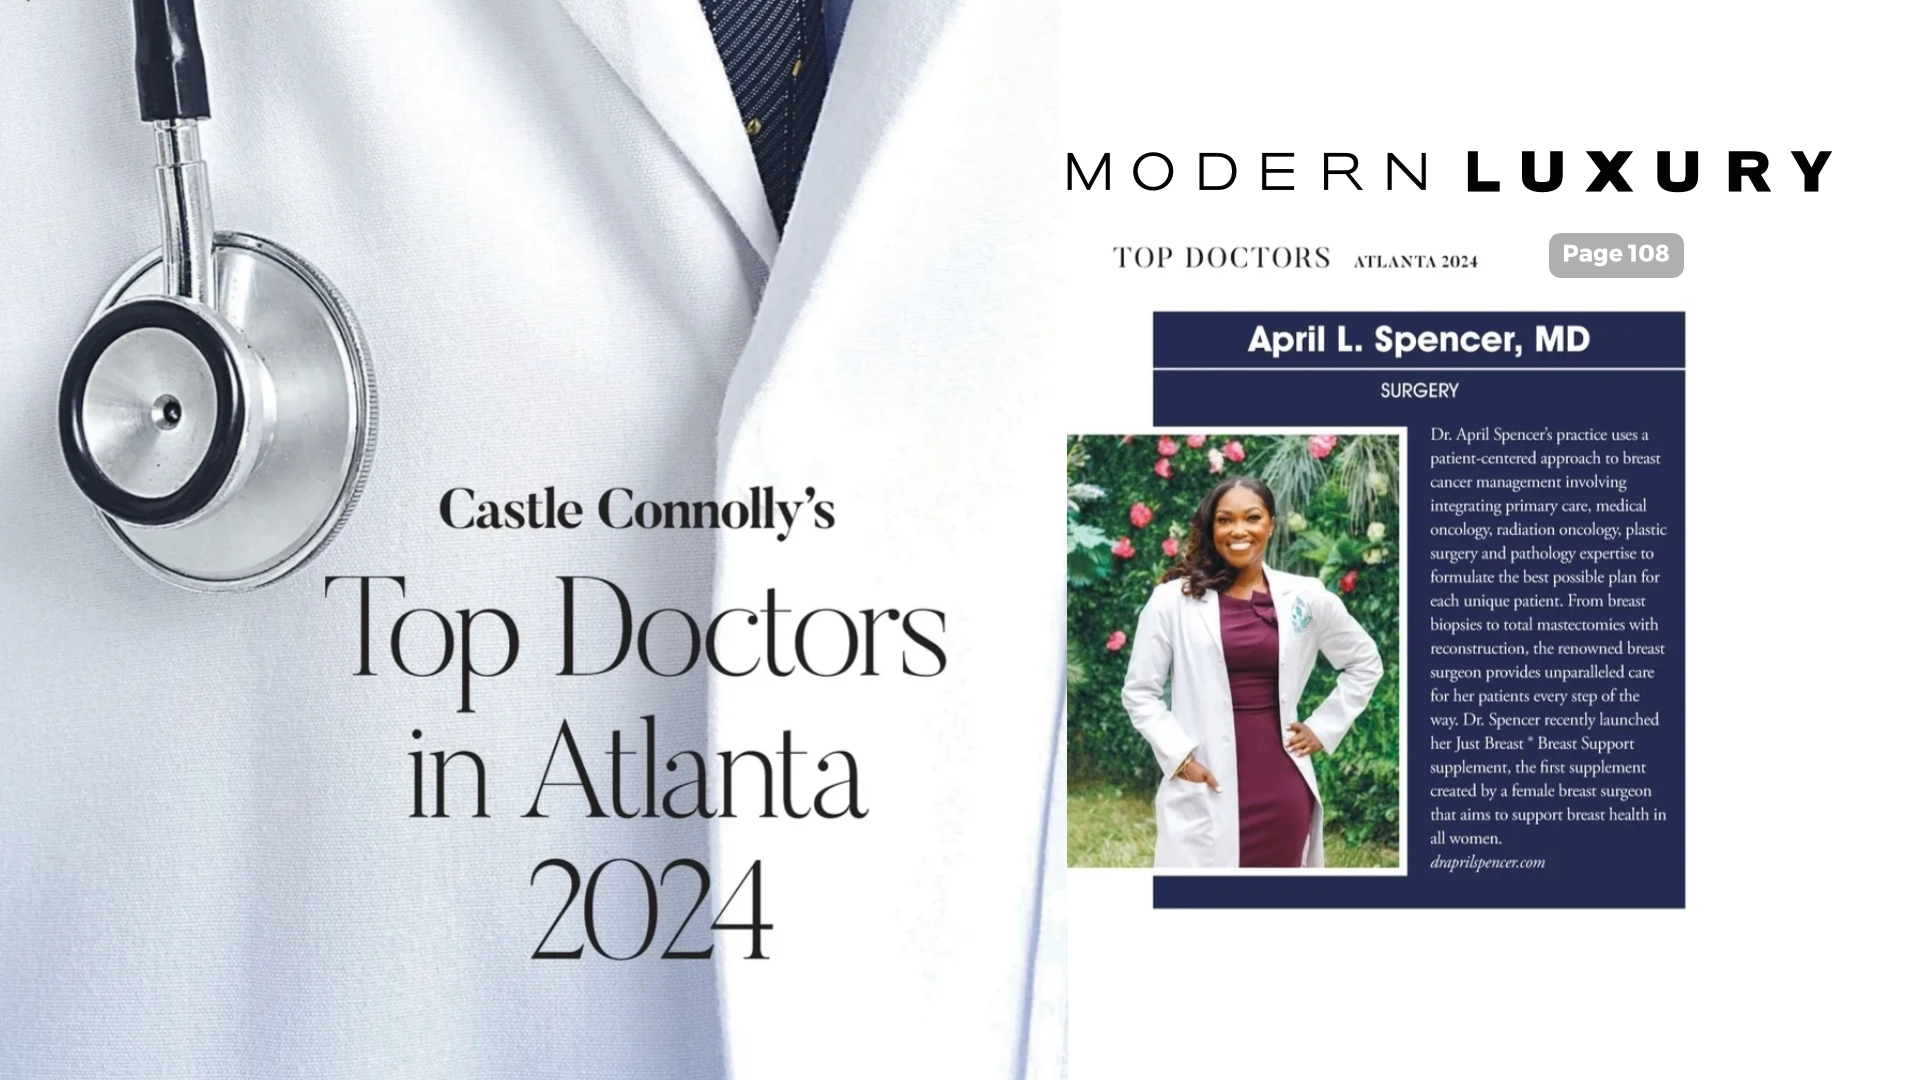 Dr. April Spencer selected as one of Atlanta's Castle Conolly's Top Doctors 2024